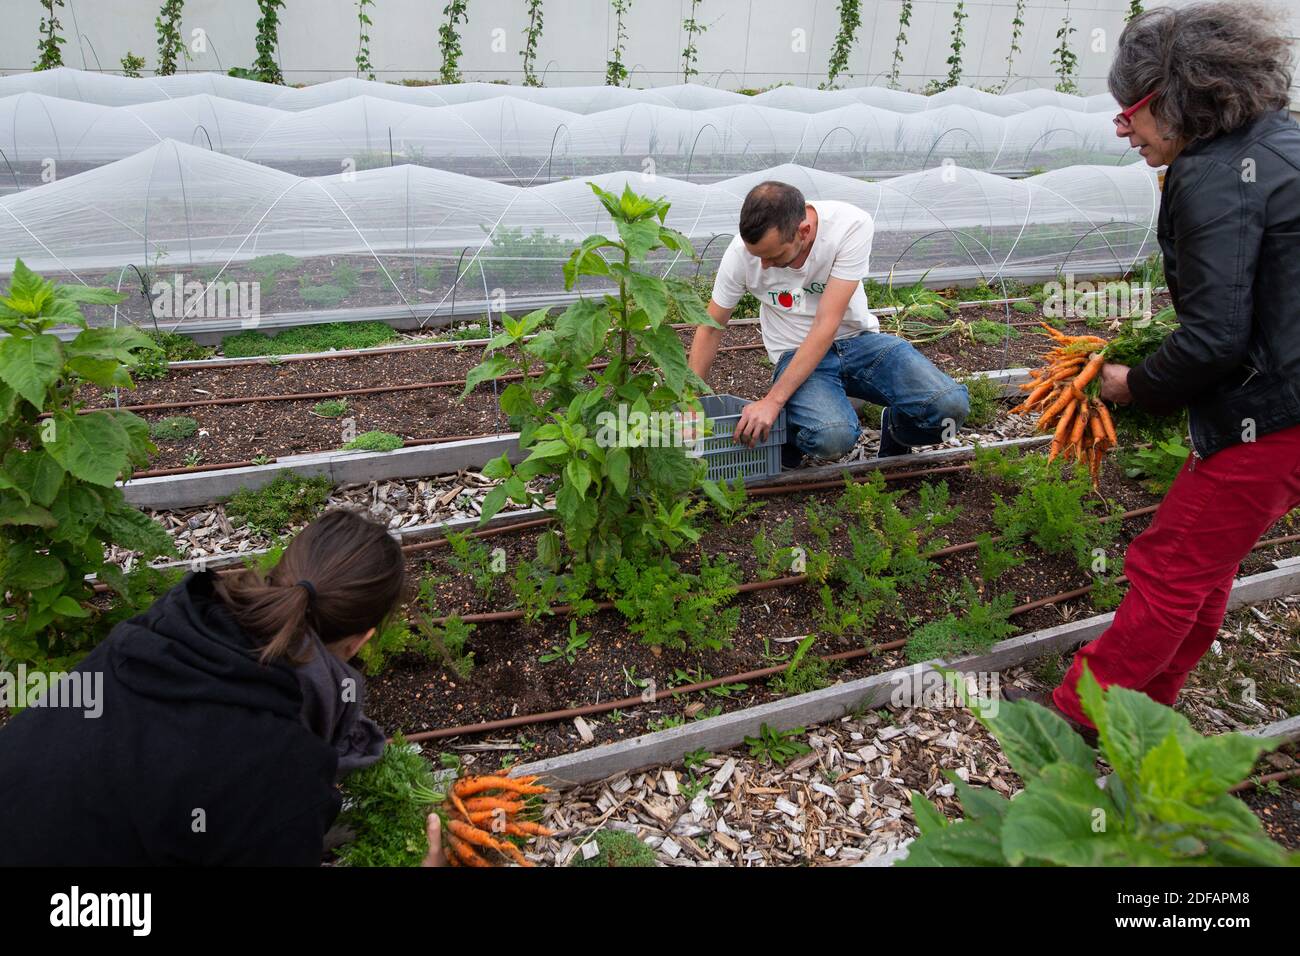 Staff of the company Topager works to harvest fruits and vegetables such as carrots on the shared gardens on the roof of the Opera Bastille, where the roofs of Paris are visible. The team is composed of gardener and landscaper. On June 9, 2020 in Paris, France. Photo by Raphael Lafargue/ABACAPRESS.COM Projet d’Agriculture Urbaine Opéra 4 Saisons porté par Topager sur les toits de l’Opéra Bastille Stock Photo